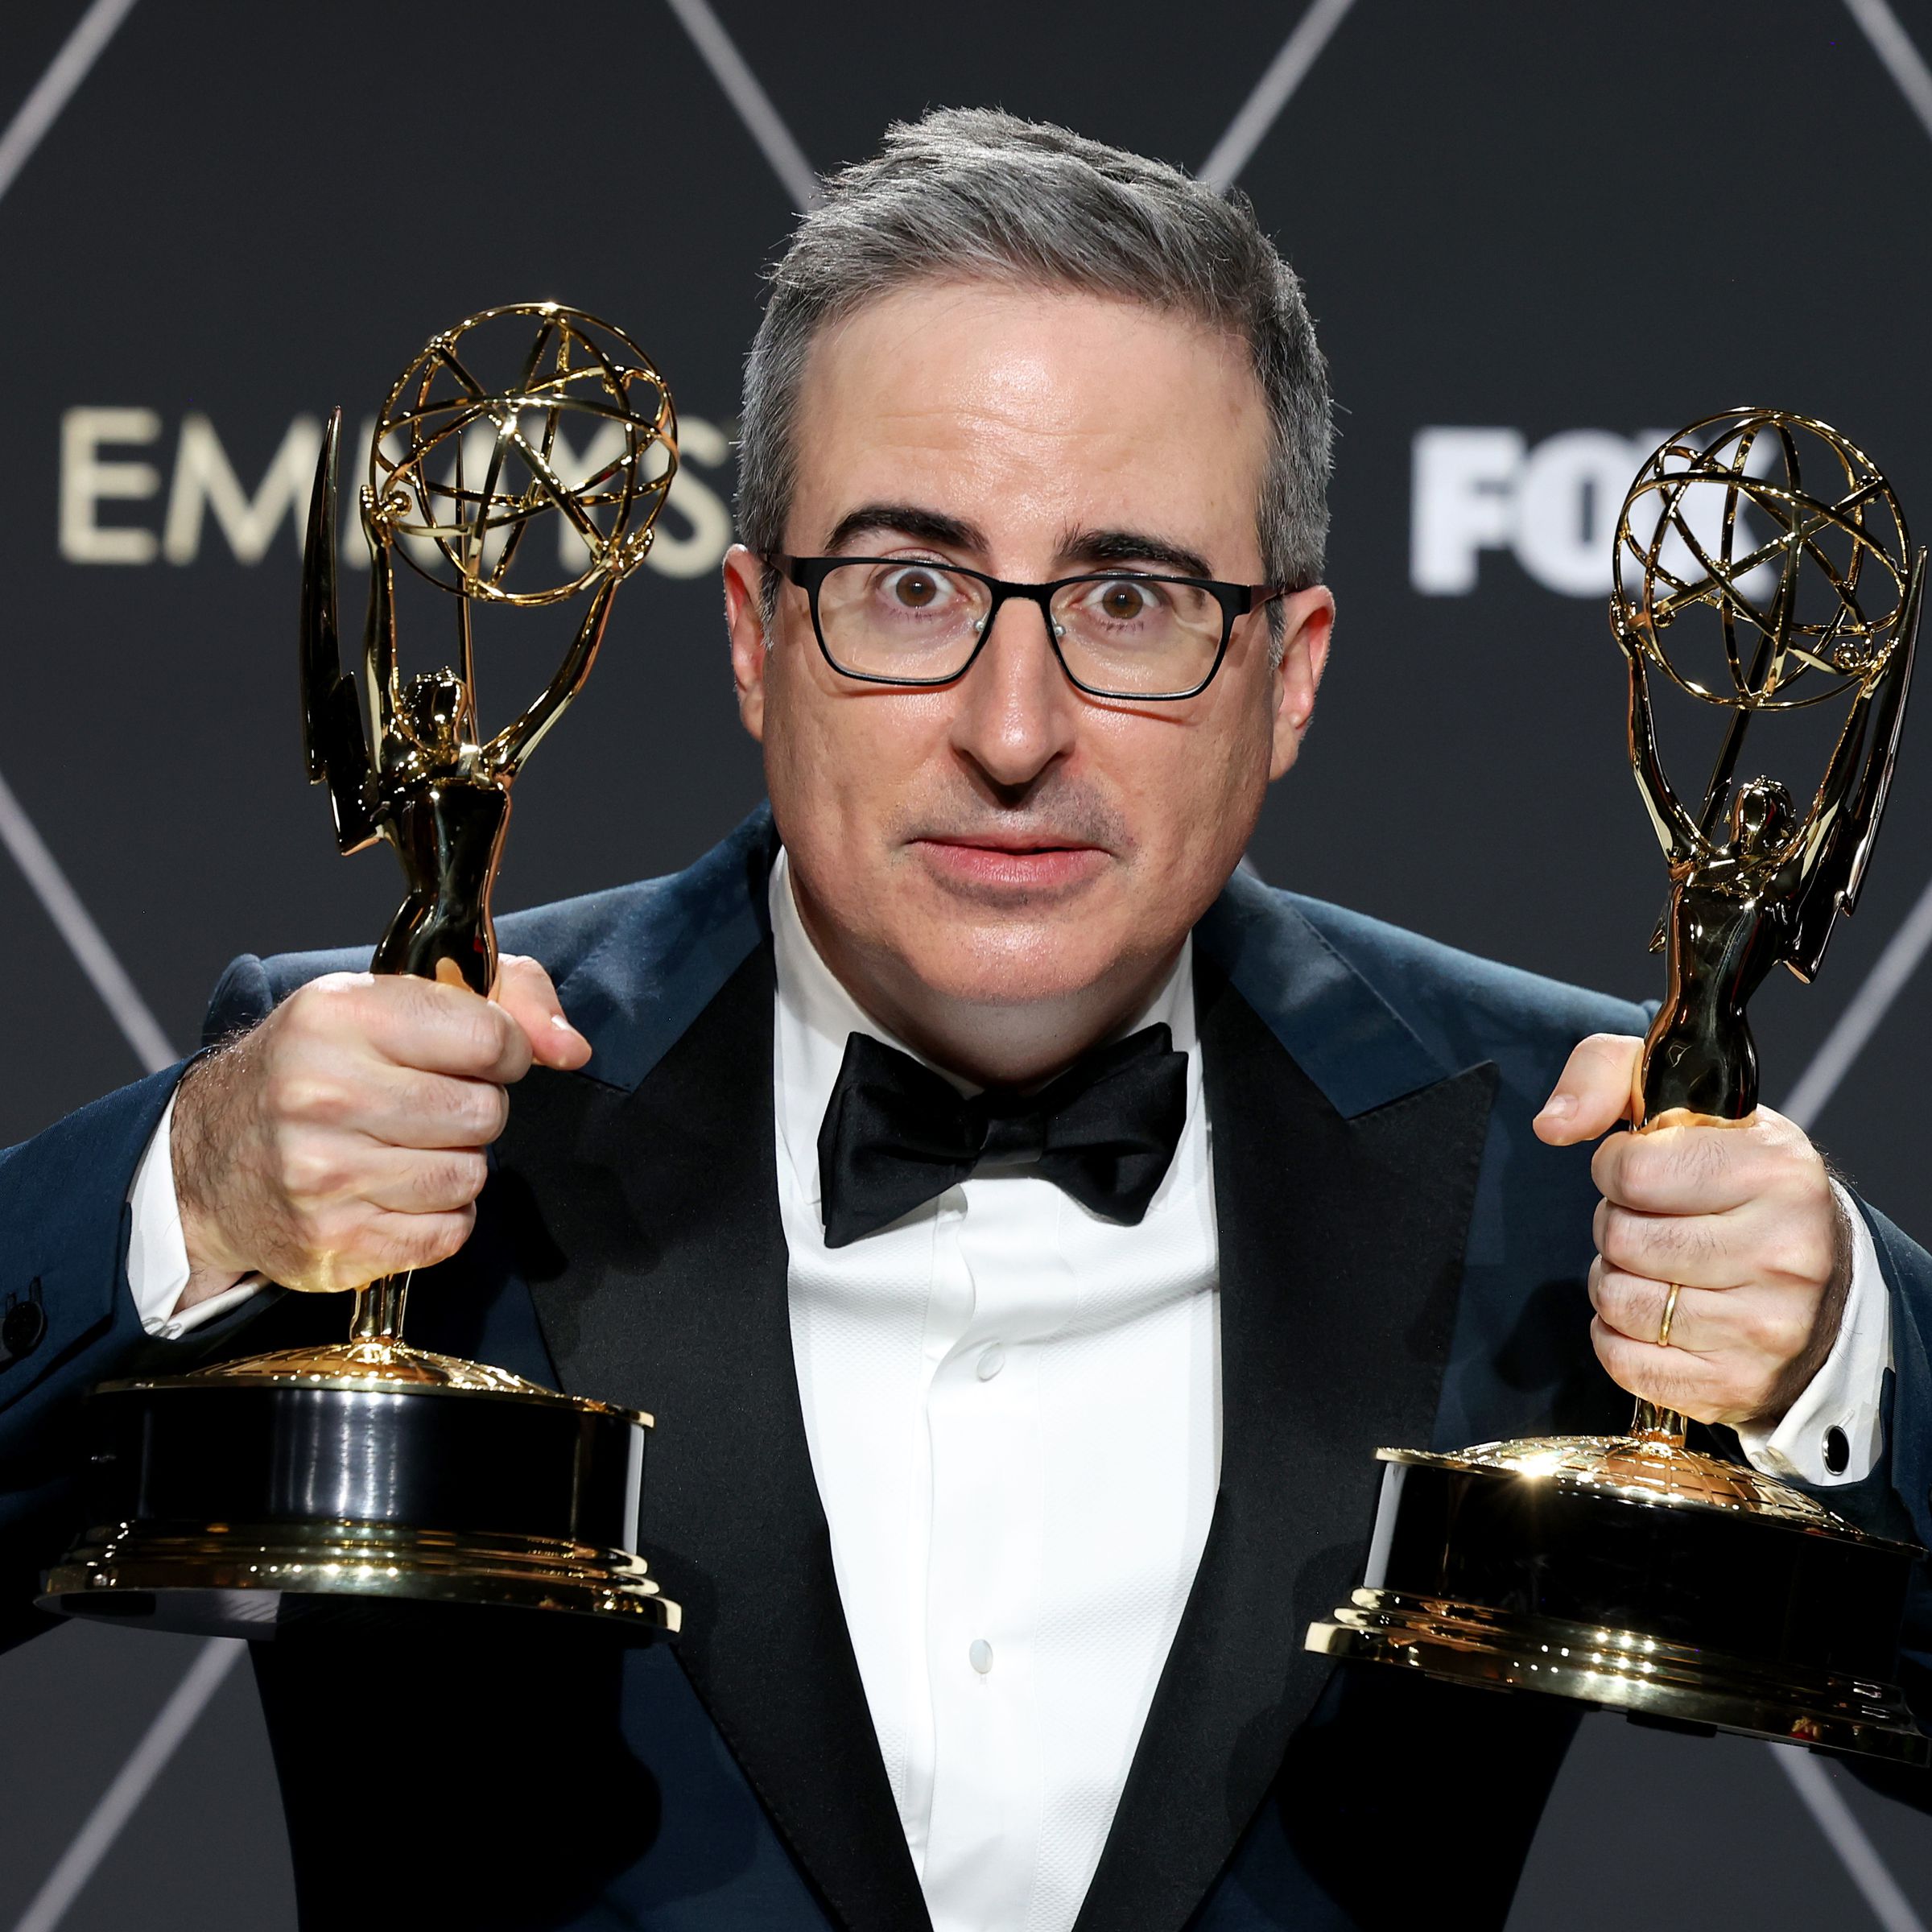 John Oliver wearing a Tuxedo and making a distraught face while holding two Emmys.